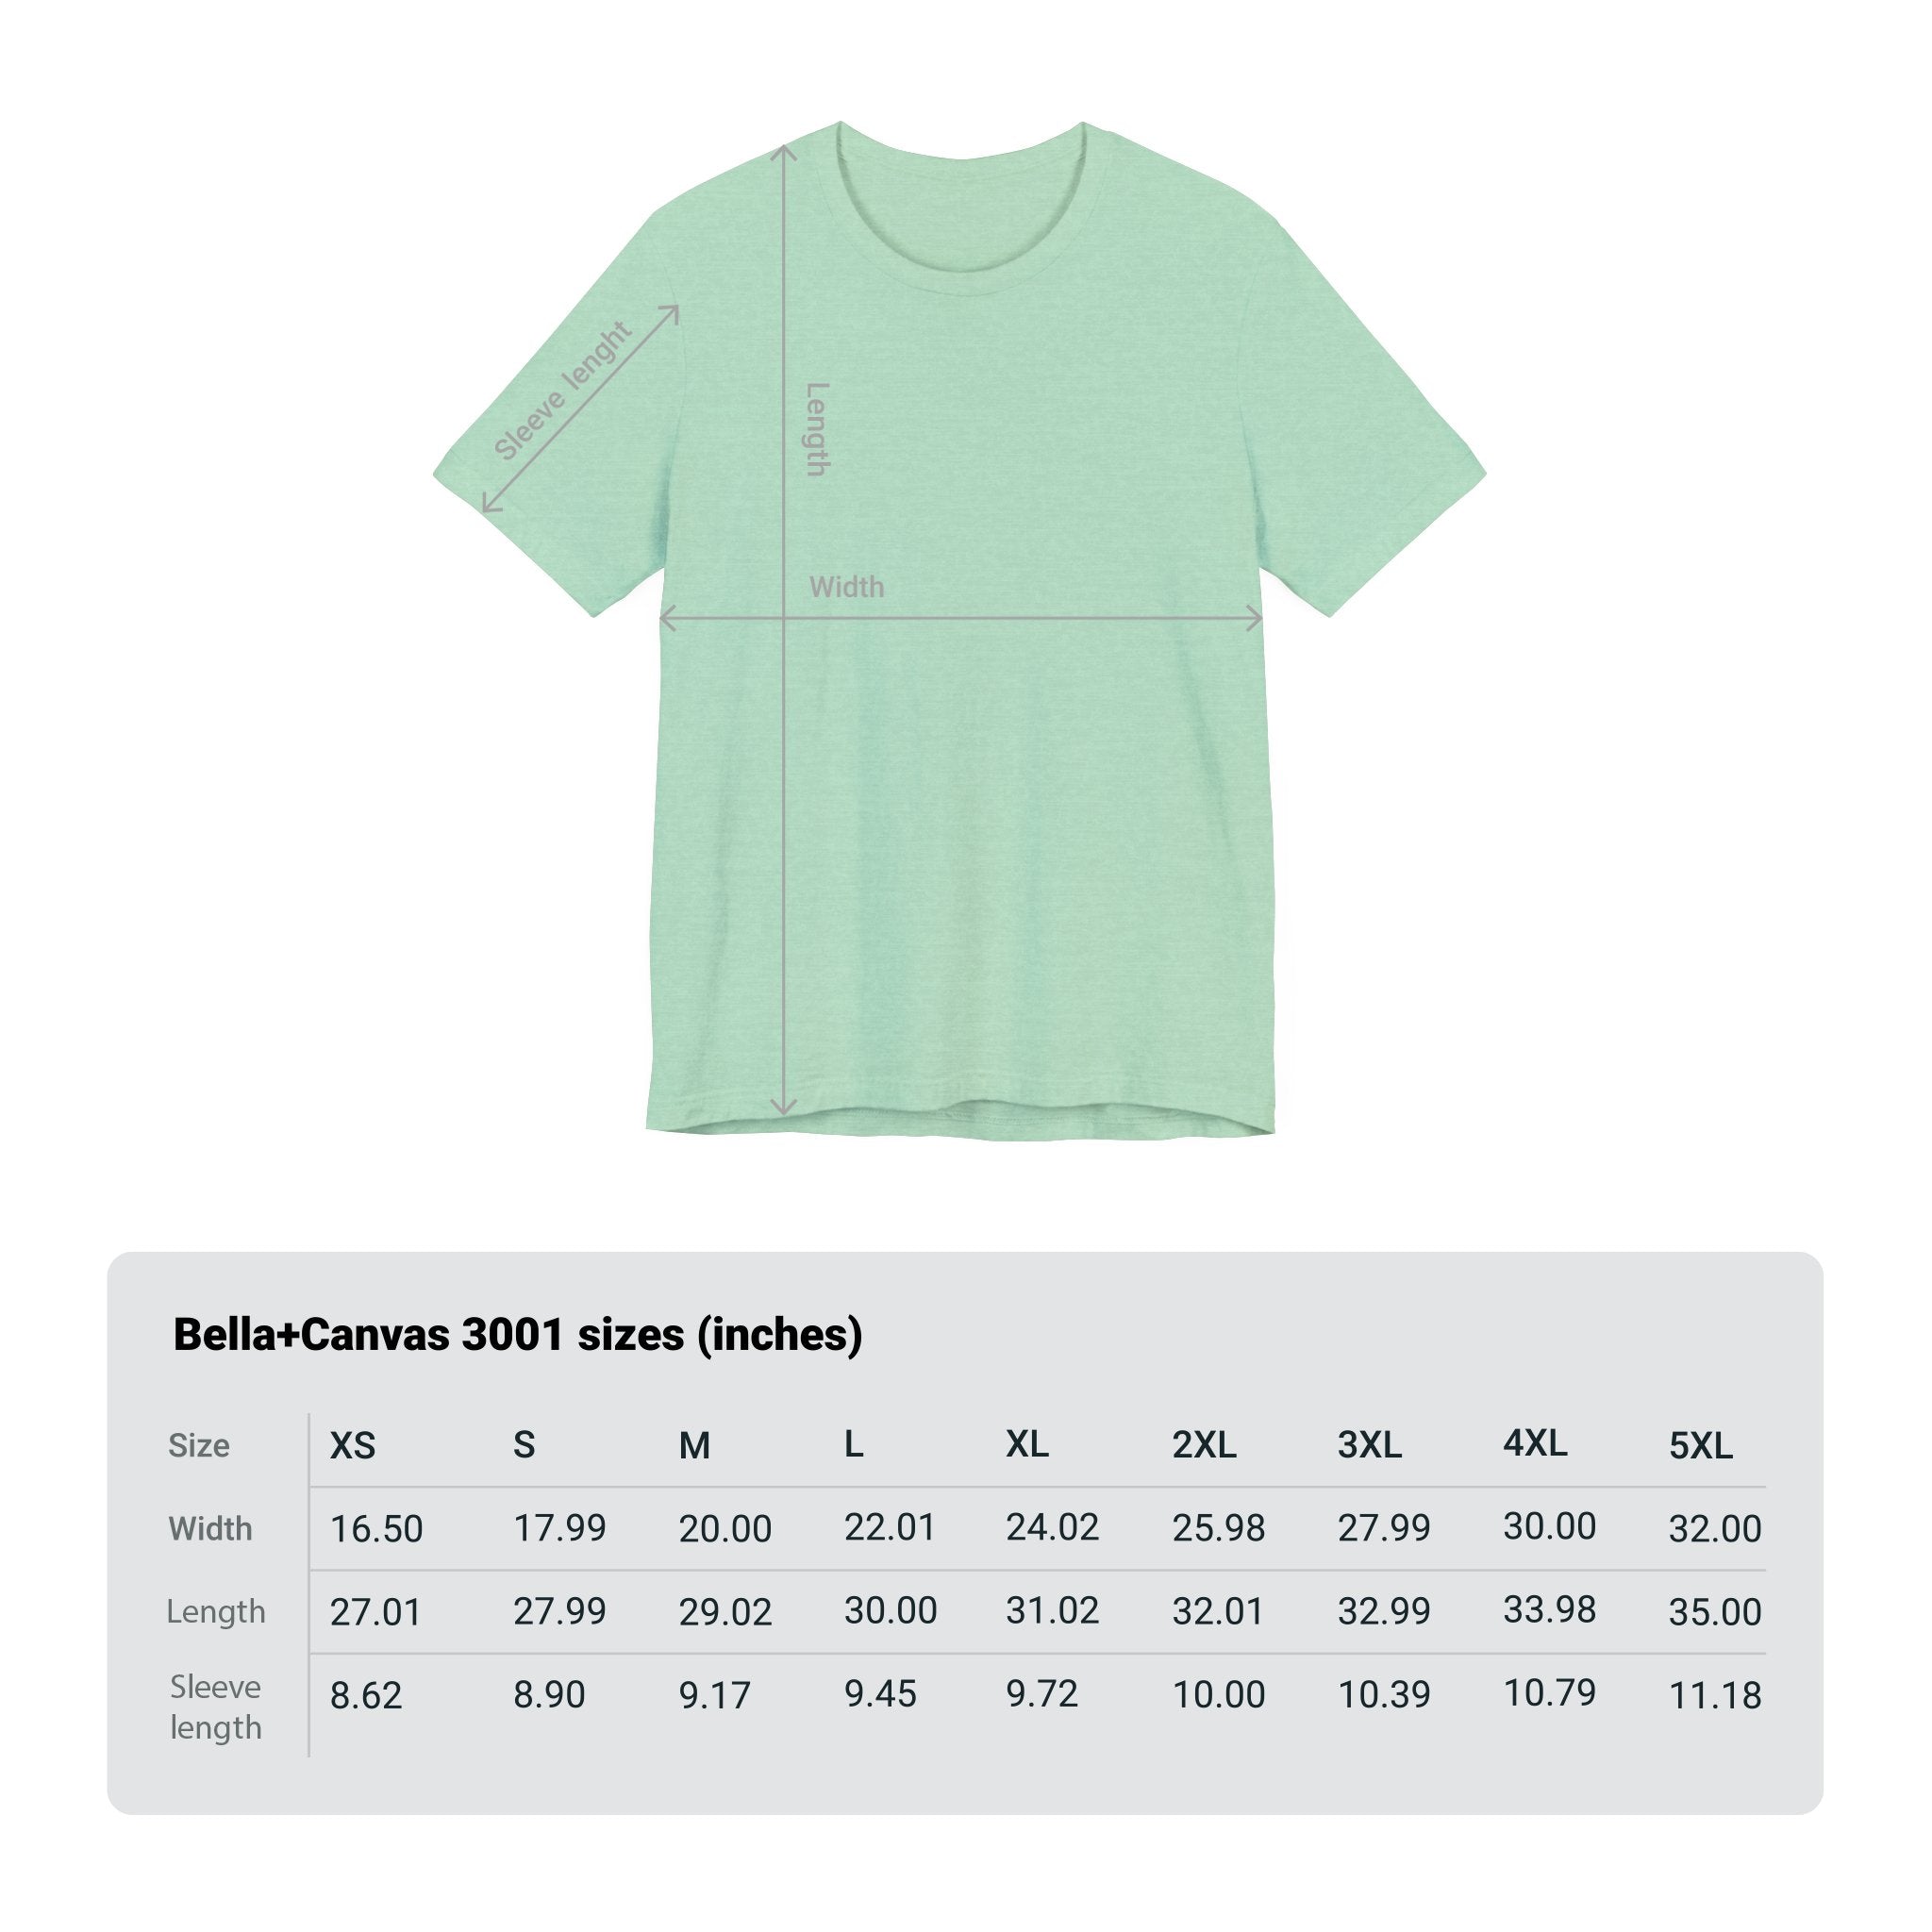 Mint green unisex jersey tee displayed above a size chart listing dimensions for various sizes from XS to 5XL.
Product Name: W-H-At-? -> Mint Green Unisex Jersey Tee